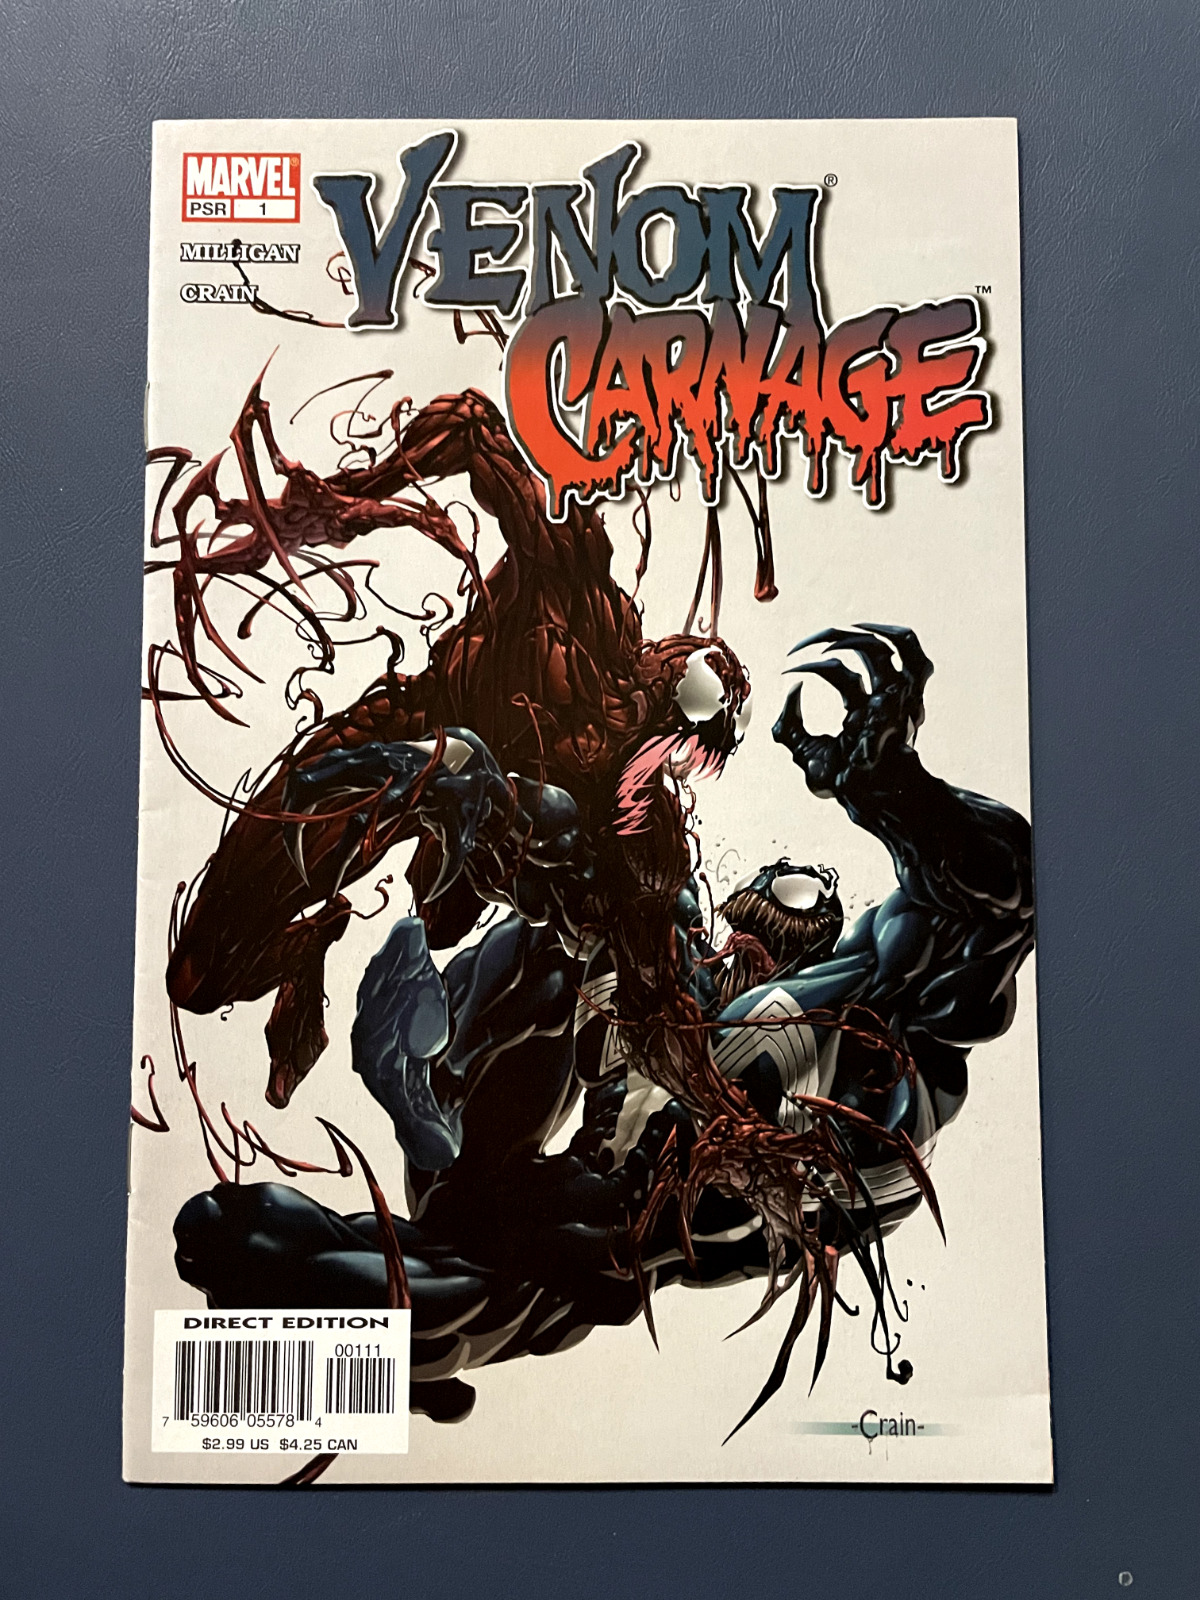 Venom vs Carnage #1 -1st appearance of Patrick Mulligan (later becomes Toxin)